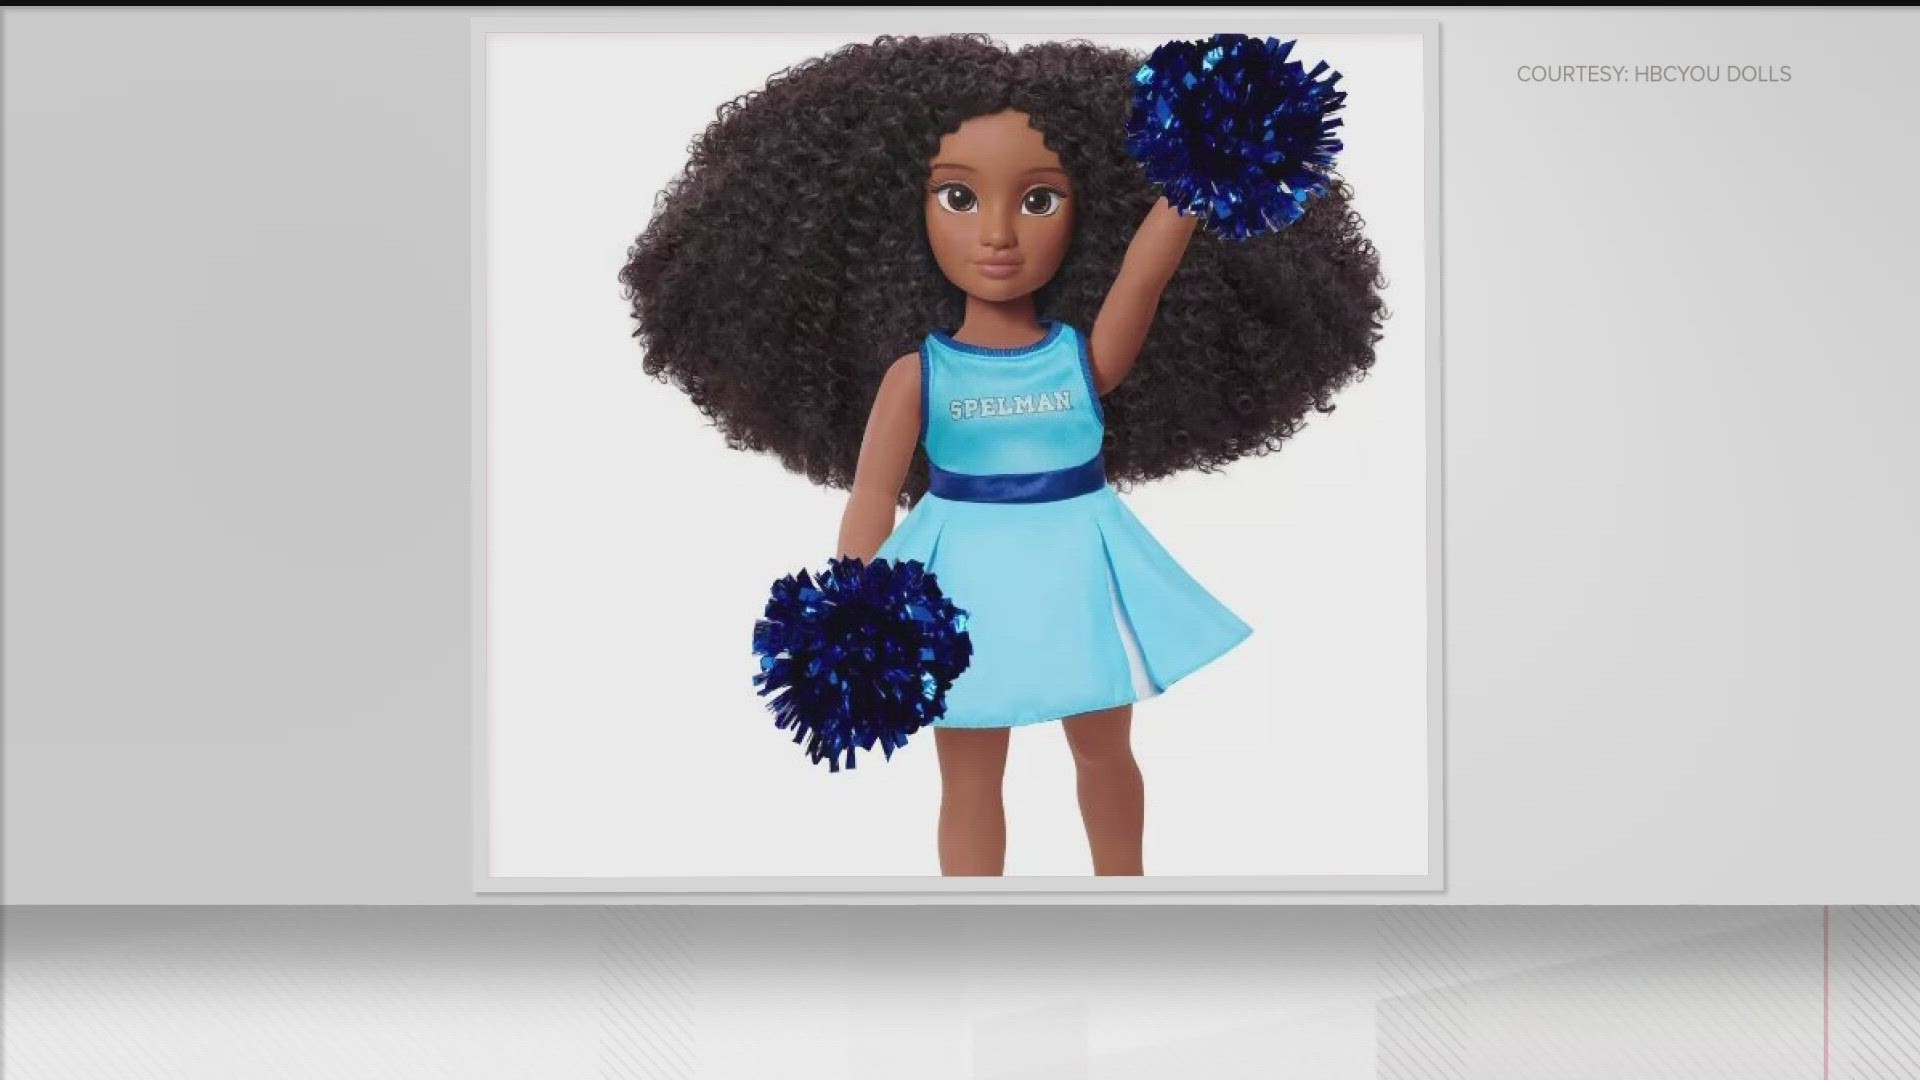 Launched in the fall and dressed in Spelman blue, the doll is modeled after a Spelman cheer captain.